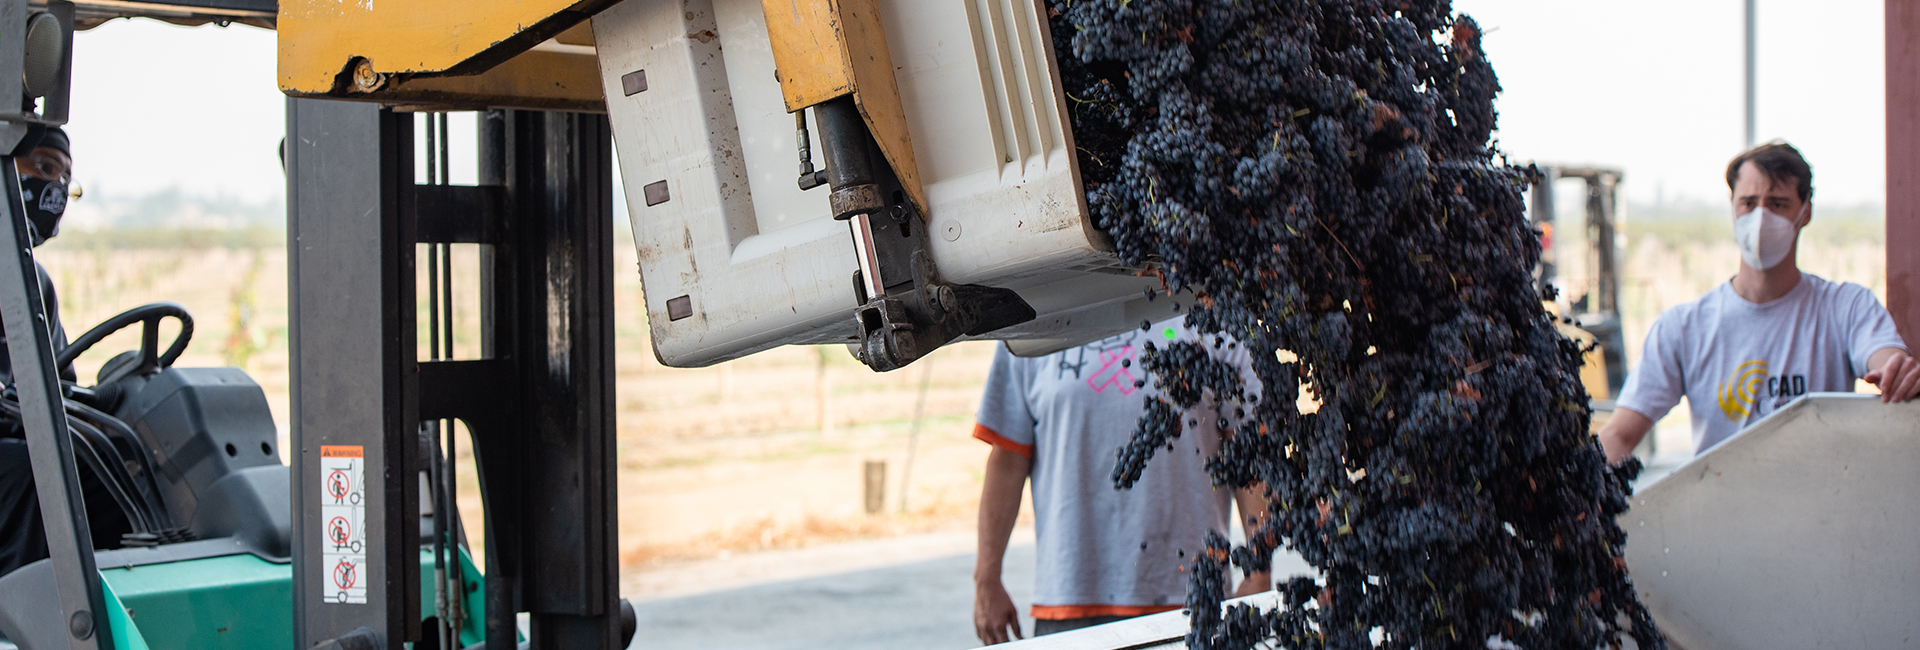 Forklift dropping grapes into crusher